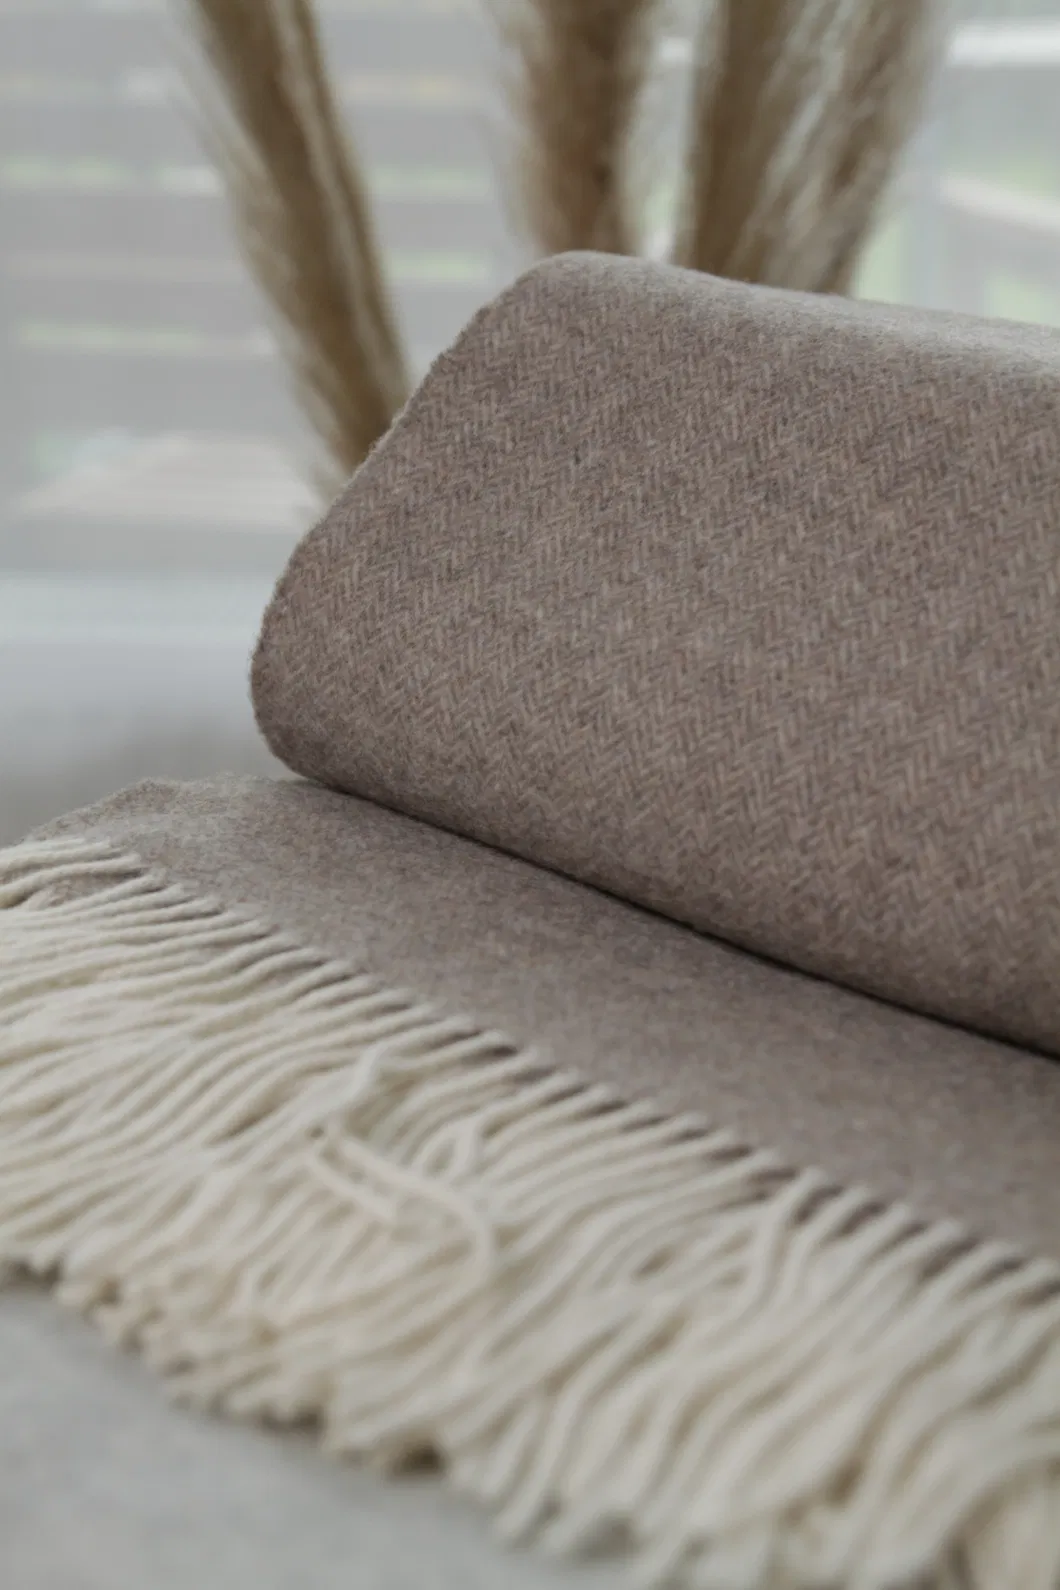 Fashionable and Lightweight Air-Conditioned Wool Blanket